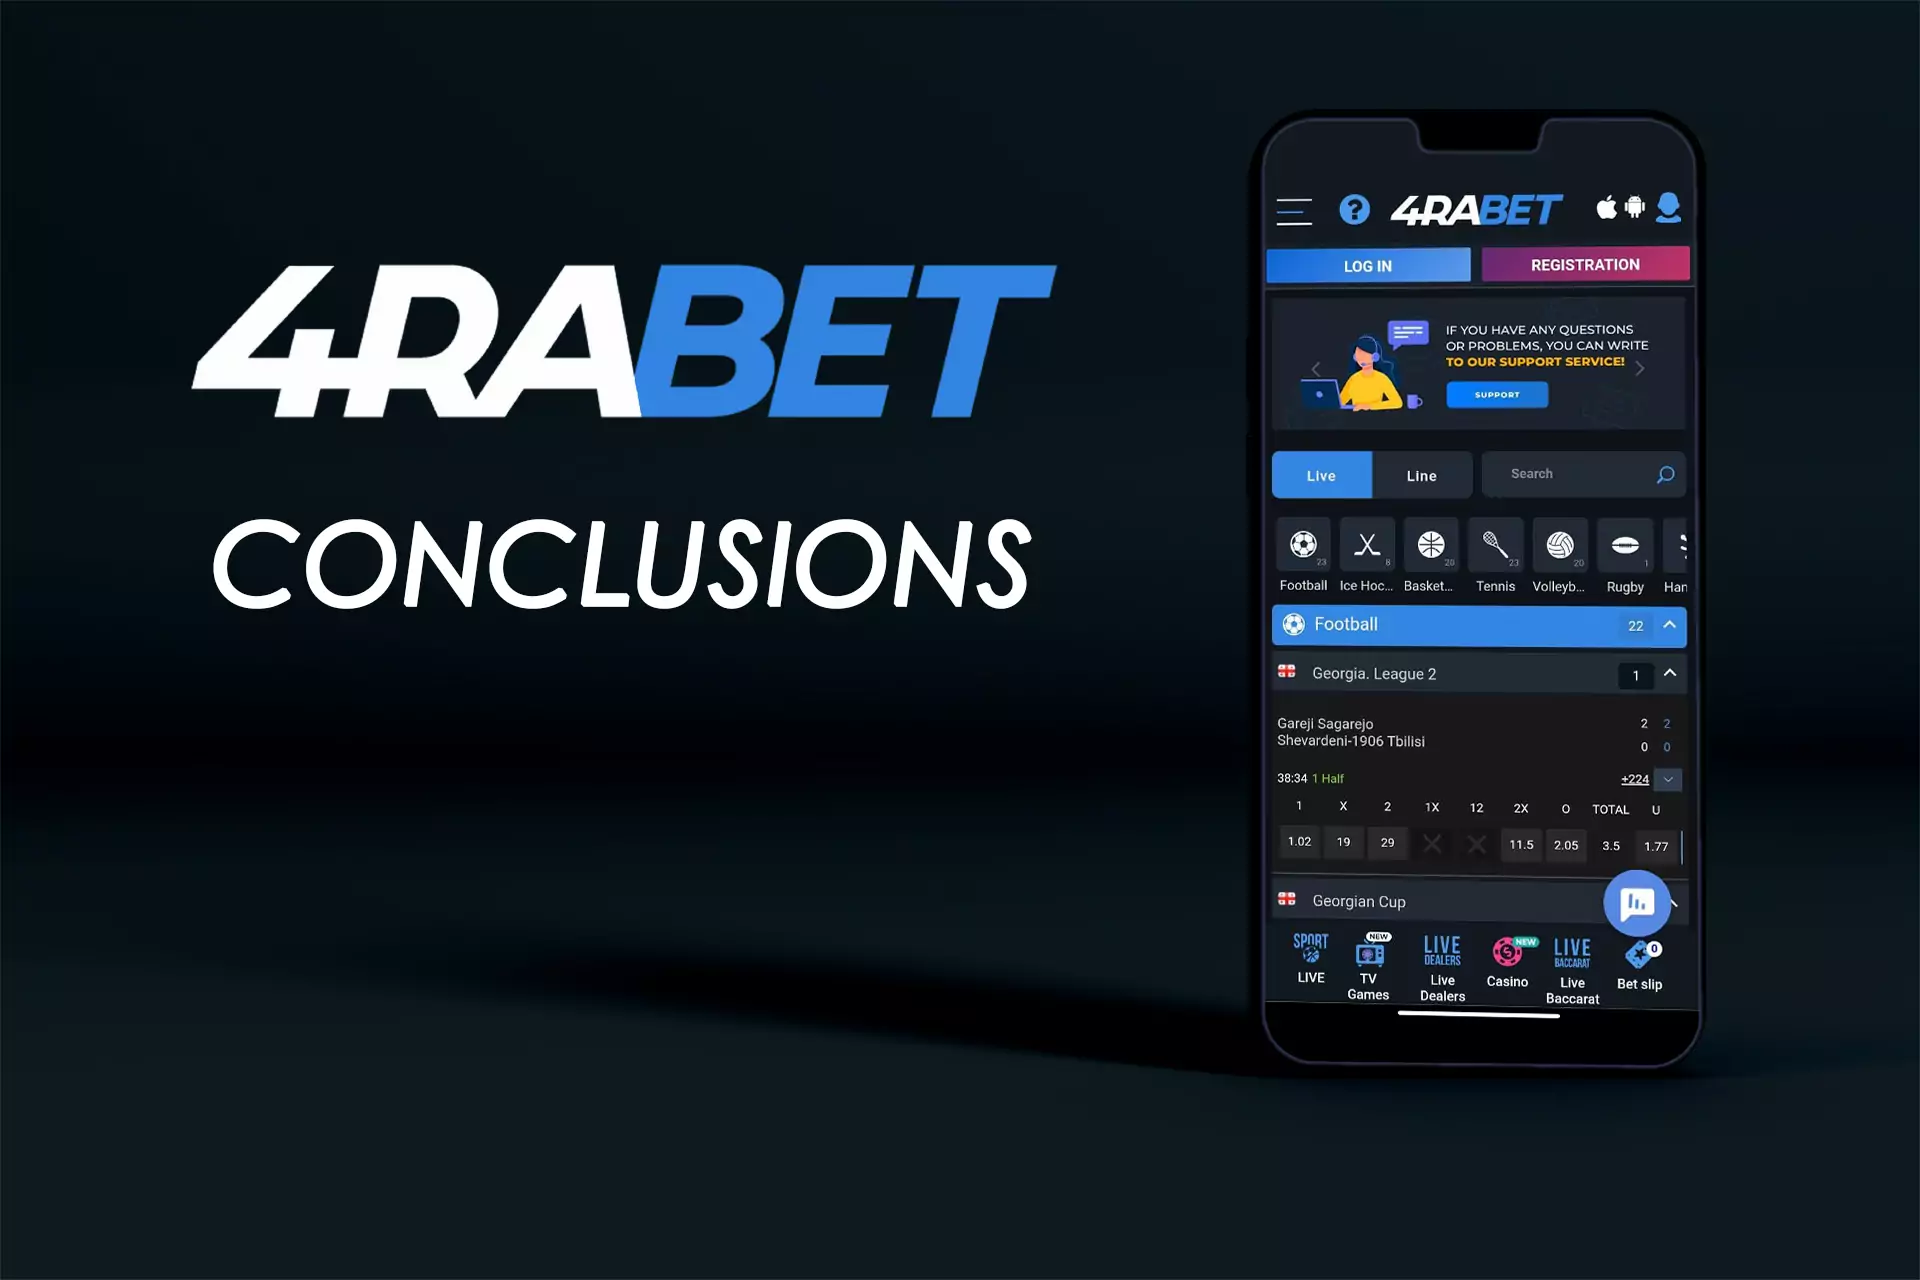 Read the conclusions about the quality of the 4rabet app for Android and iOS.